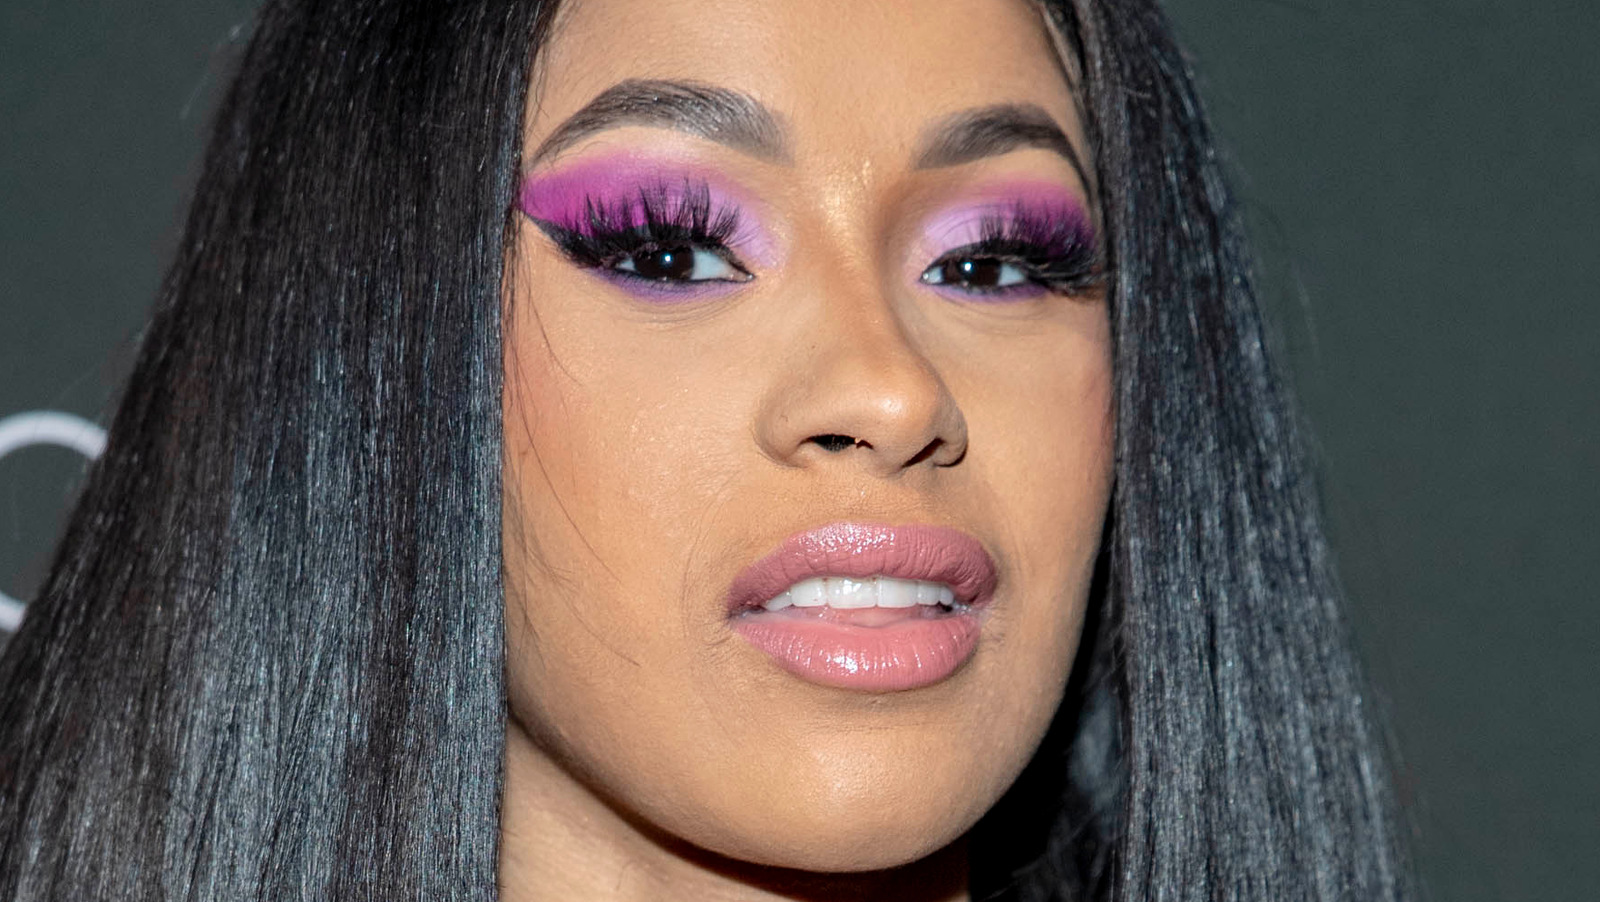 Cardi B's Twitter Outburst Has Fans Divided